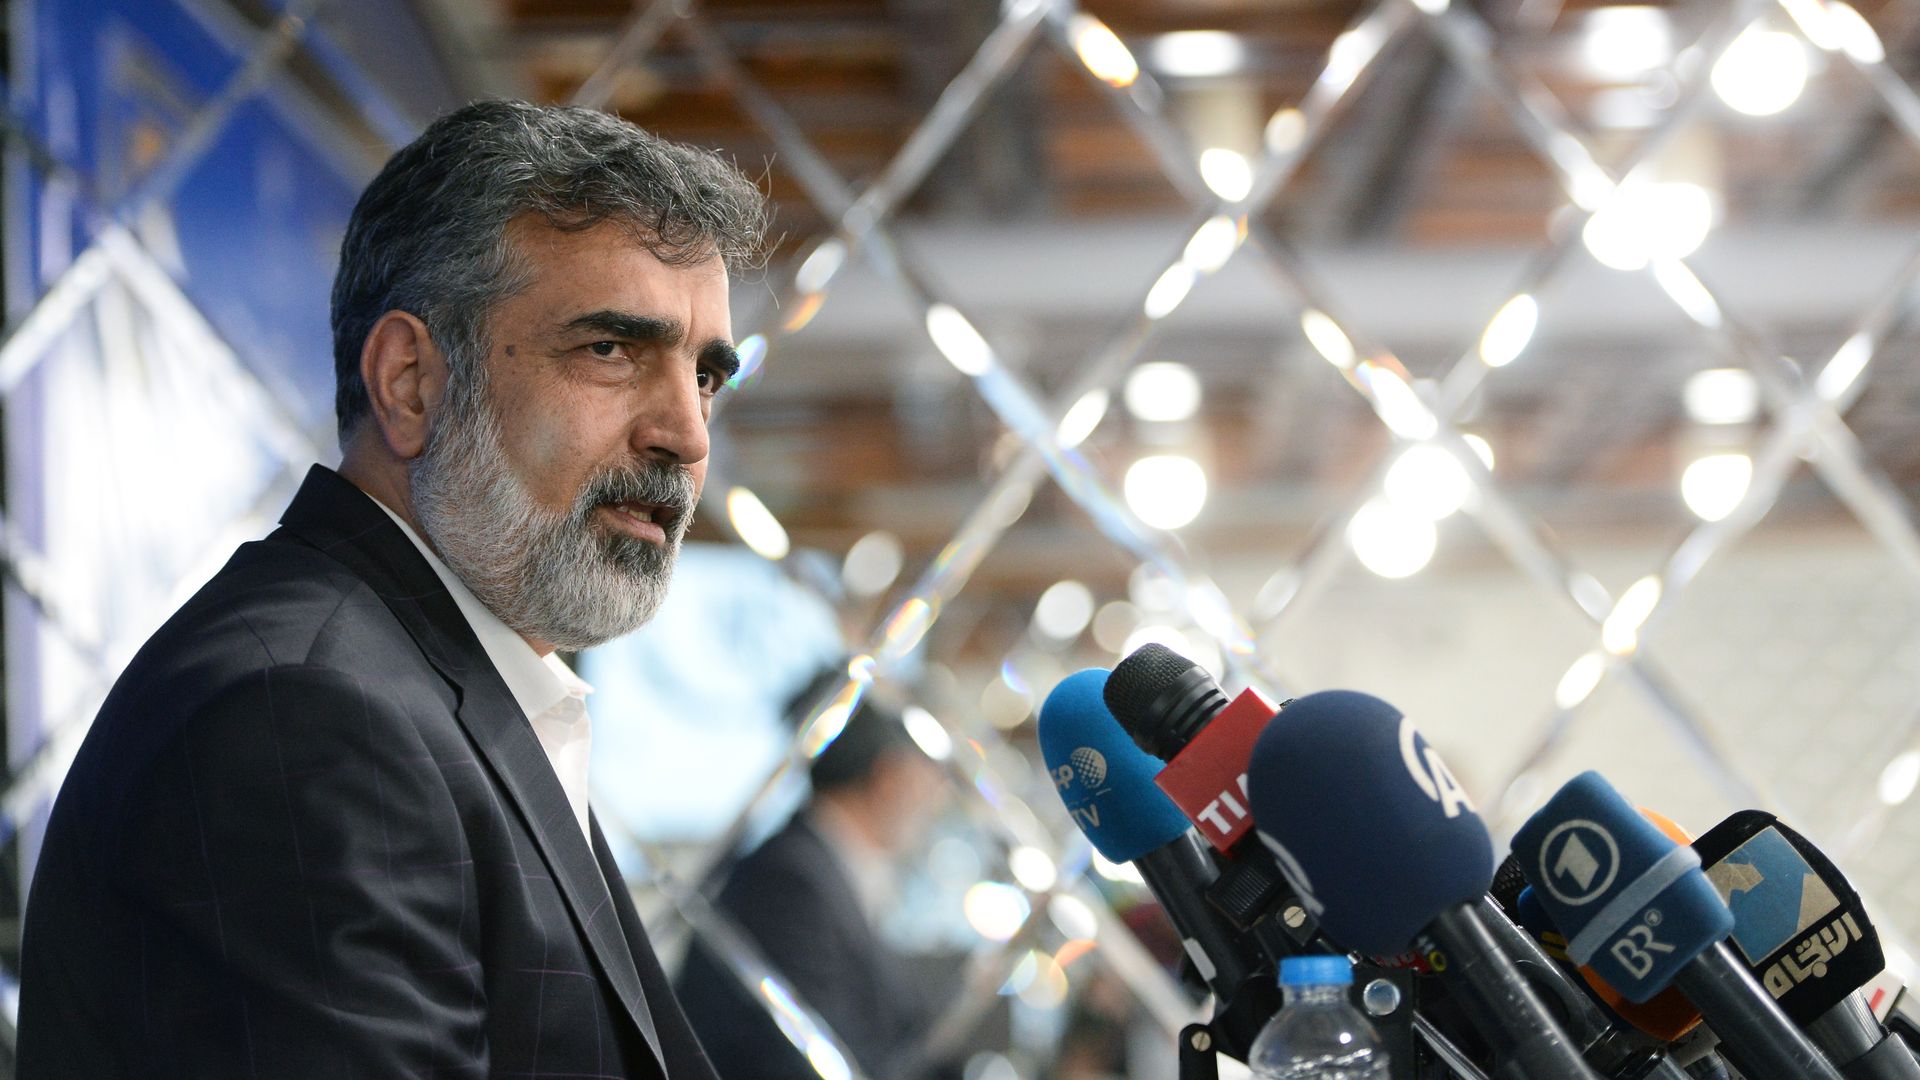 spokesman for Iran's atomic energy agency in front of microphones at a press conference